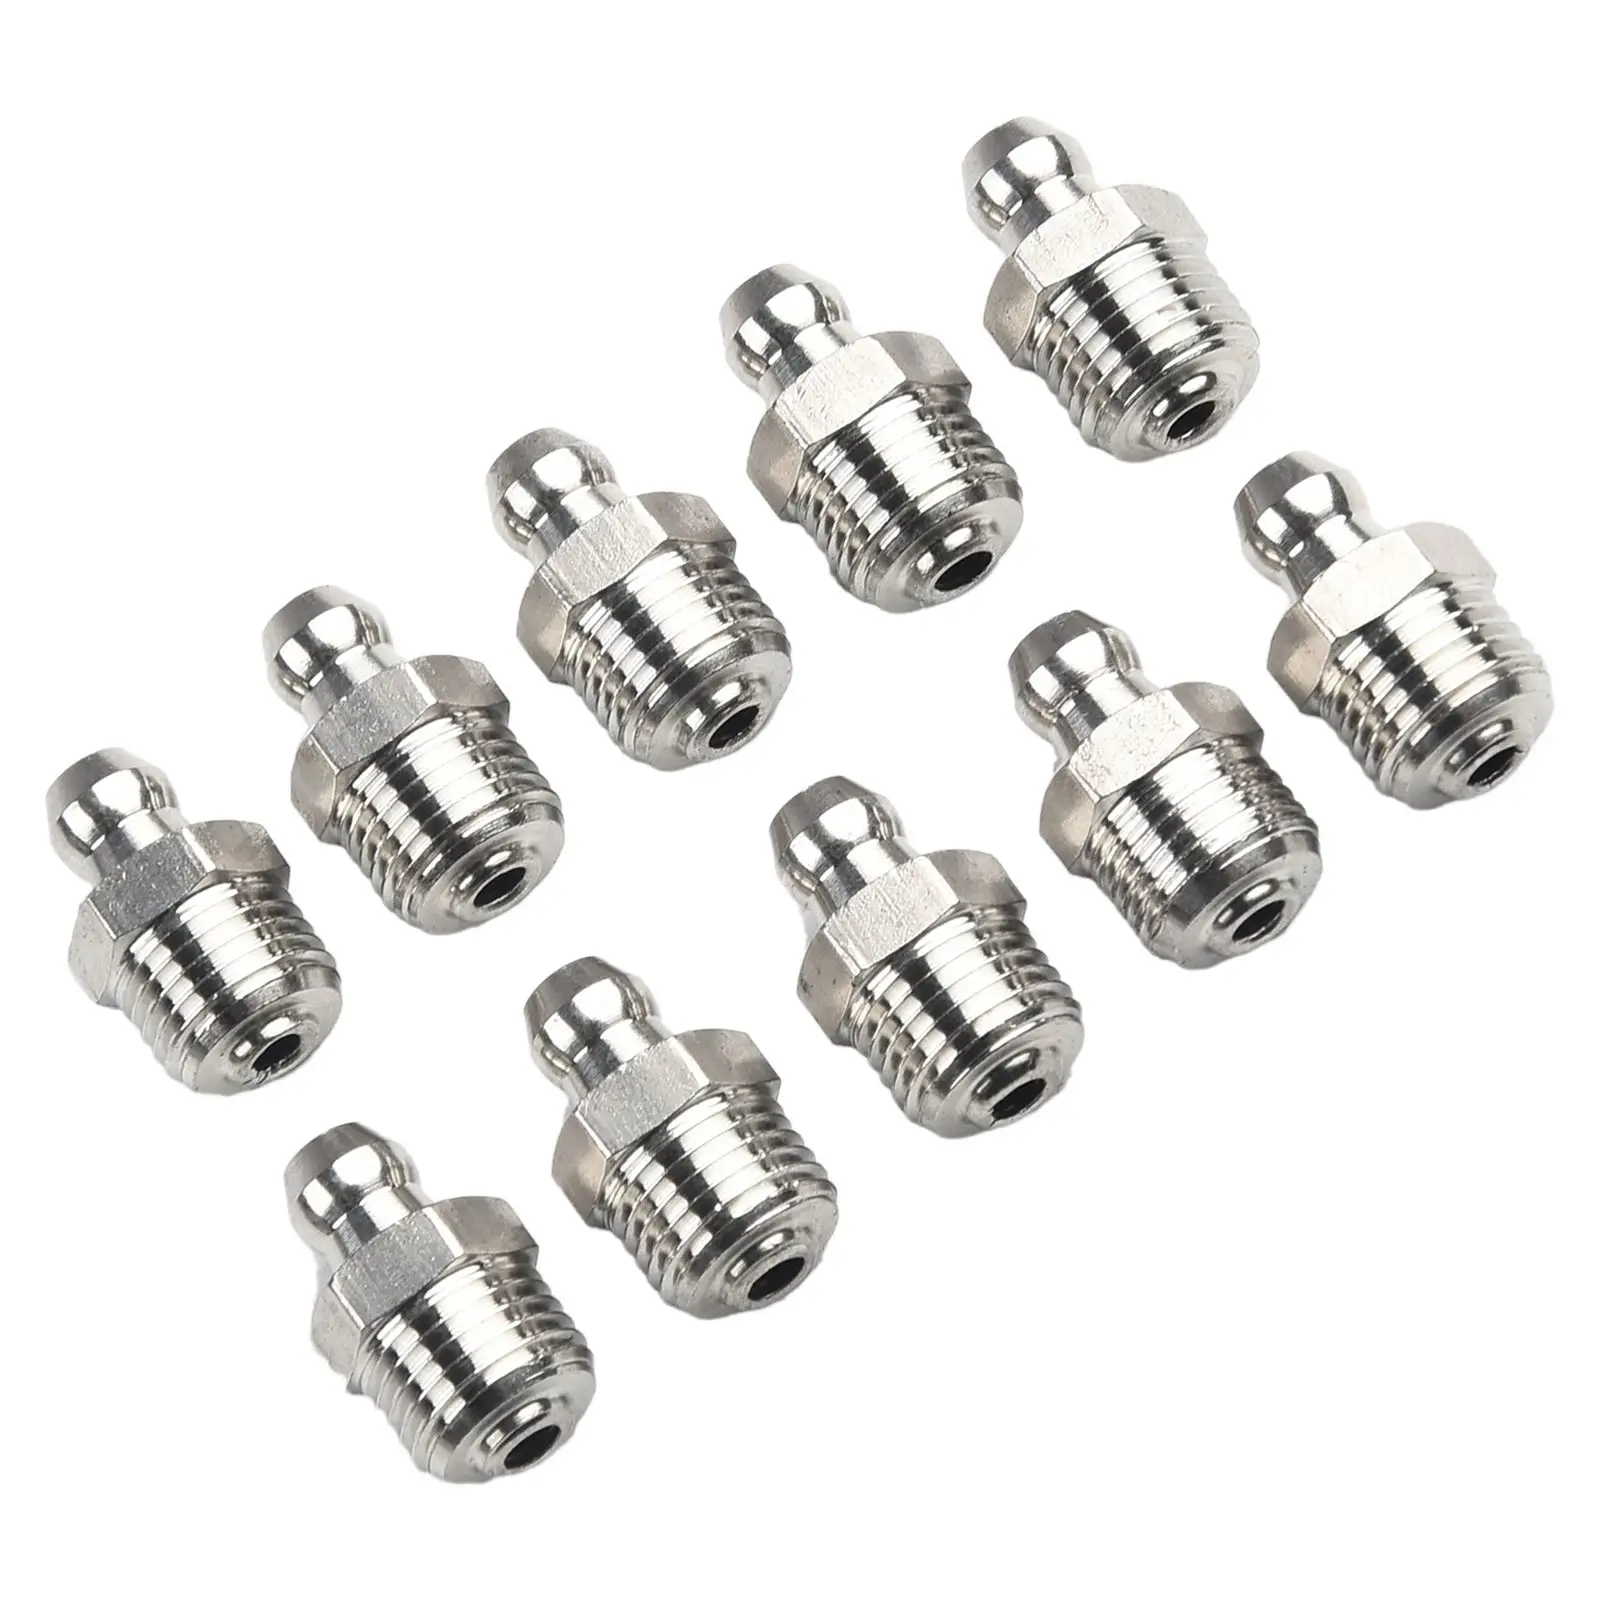 

Reliable 201 Stainless Steel Grease Fitting Straight Hydraulic Design 10pcs Pack Suitable for Most Mechanical Equipment